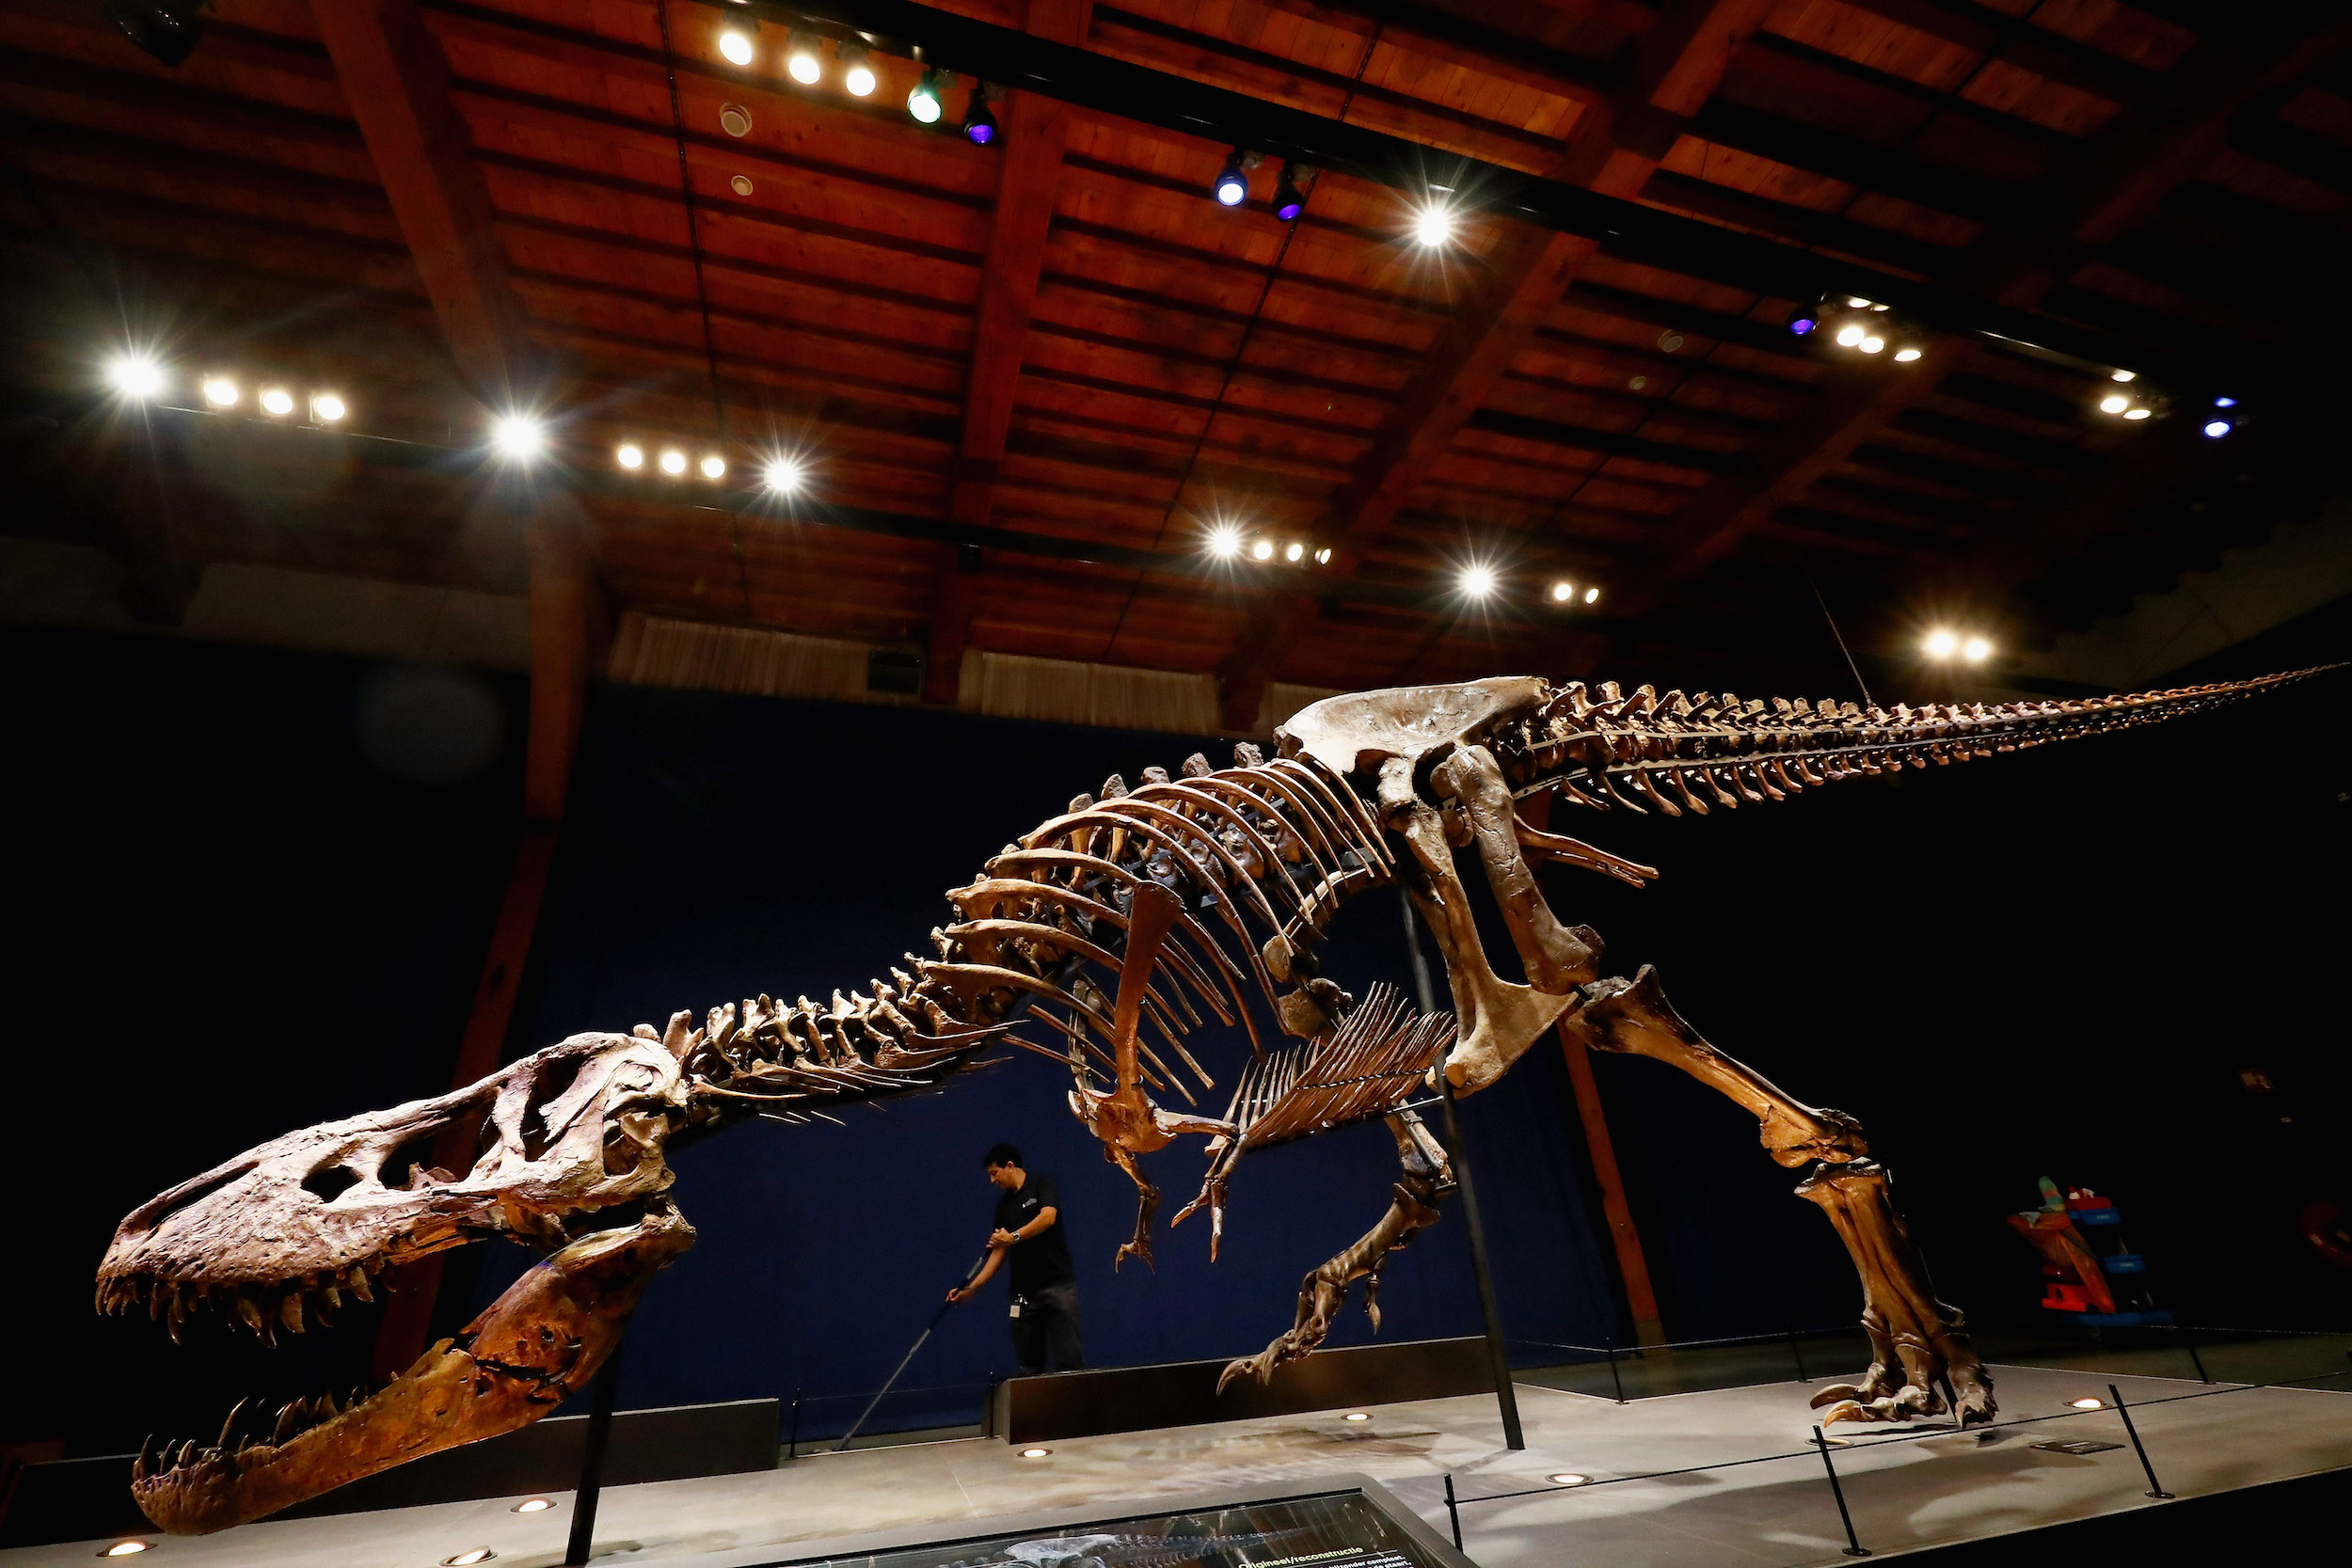 A general view of Trix the female the T-Rex exhibition at the Naturalis or Natural History Museum of Leiden on October 17, 2016 in Leiden, Netherlands. The skeleton of Tyrannosaurus rex was excavated in 2013 in Montana, USA, by Naturalis Biodiversity Center. The fossil is part of the Naturalis collection and is more than 80% of the bone volume present. All essential and high­volume bones are in place. This places Trix in the top 3 ranking of the most complete Tyrannosaurus rex skeletons in the world. In addition, all the bones are extremely well preserved. The quality of this fossil is unmatched by any other large T-Rex find in the world.